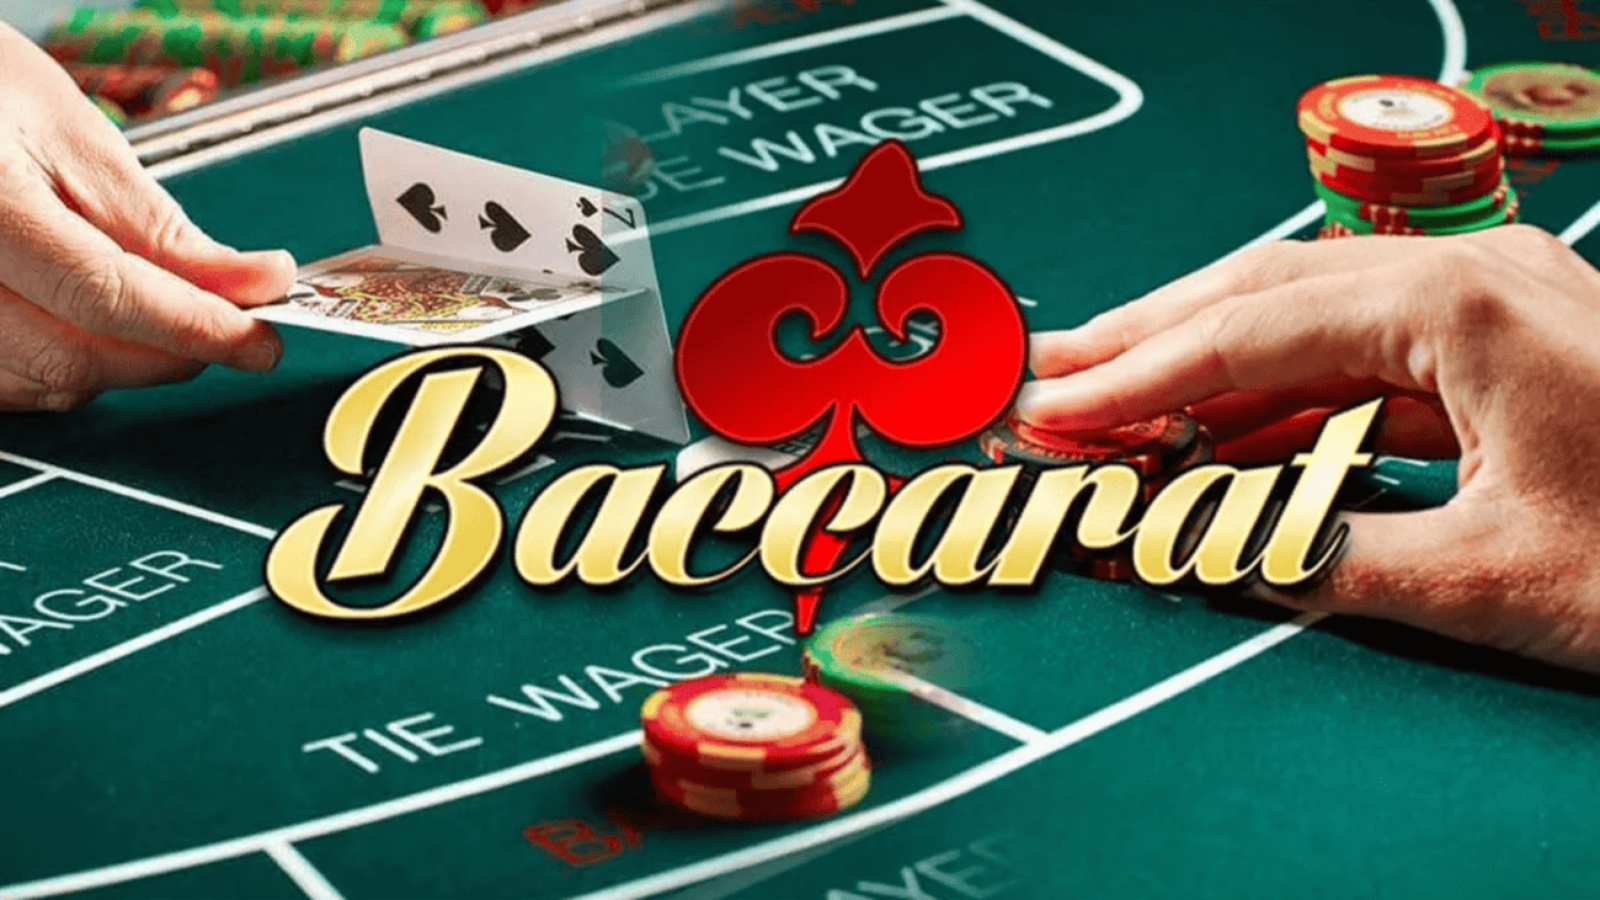 Ultimate-Guide-to-Online-Betting-ID-Providers-and-the-Excitement-of-Online-Baccarat-1600x900-1-1300x731 (1)